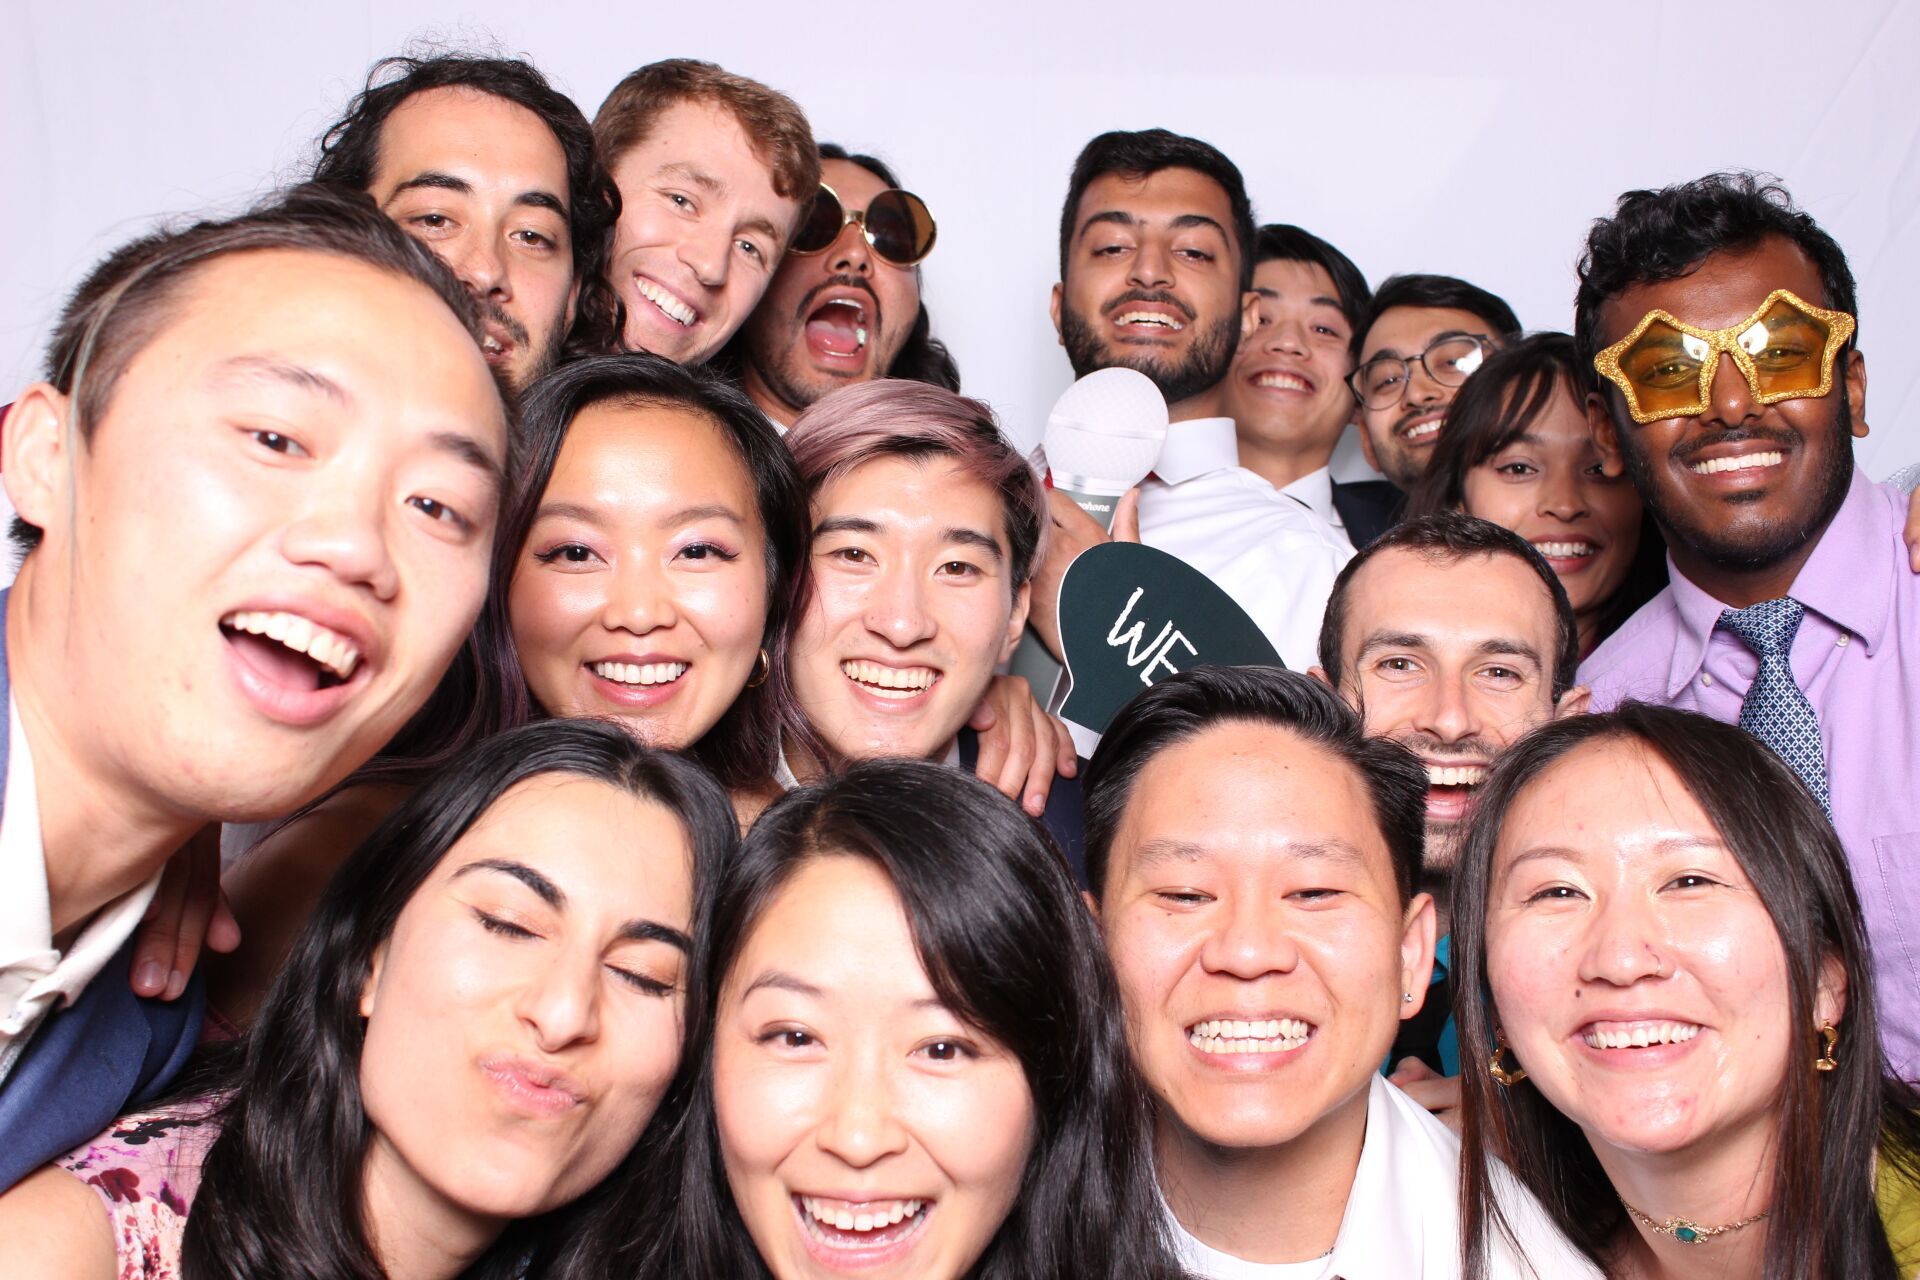 A group of people are posing for a picture in a photo booth.